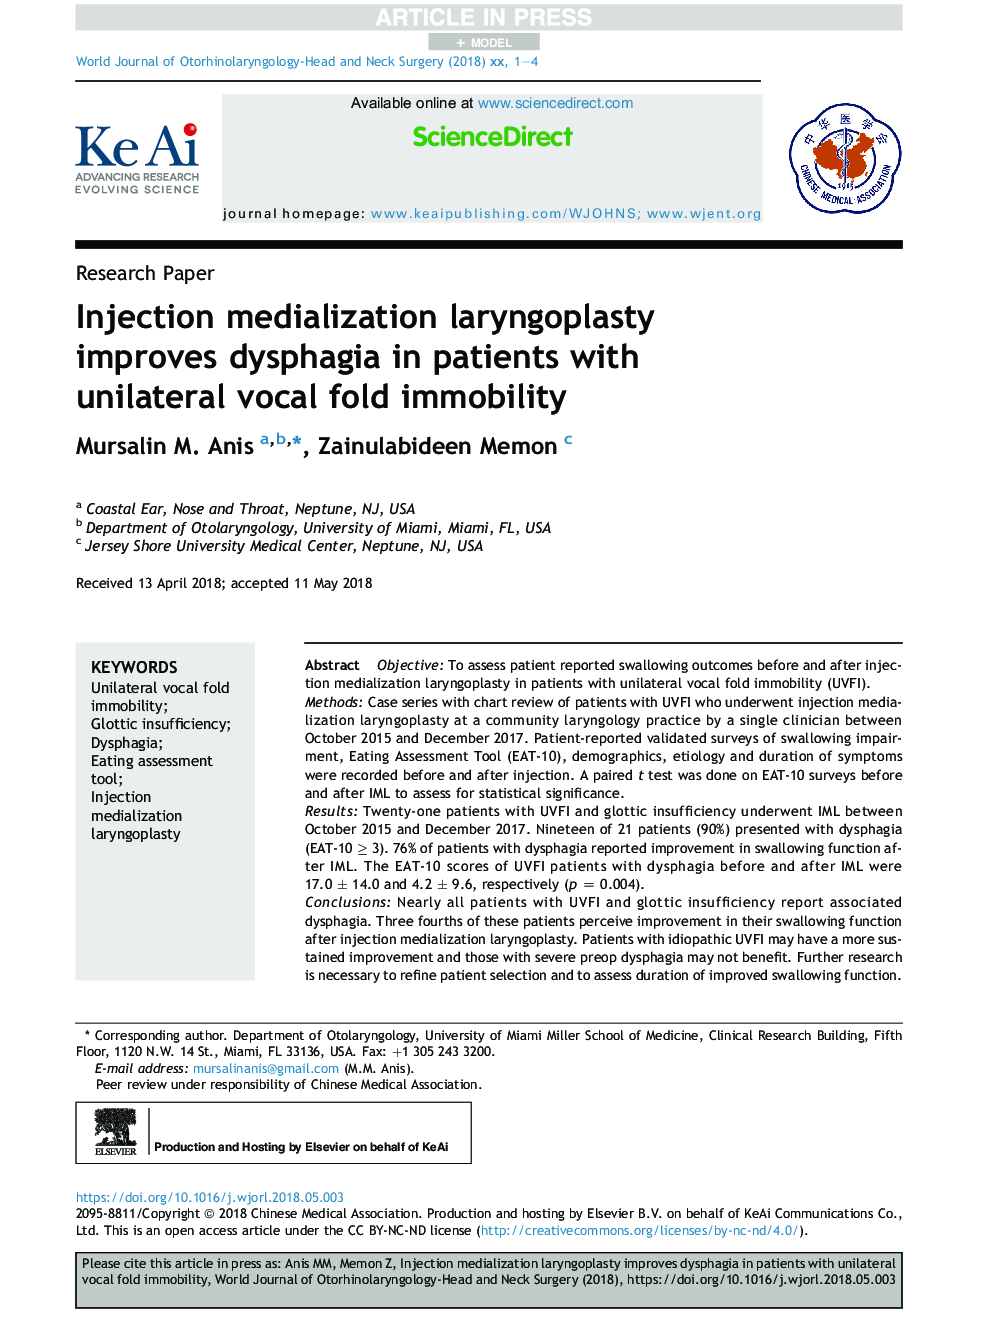 Injection medialization laryngoplasty improves dysphagia in patients with unilateral vocal fold immobility